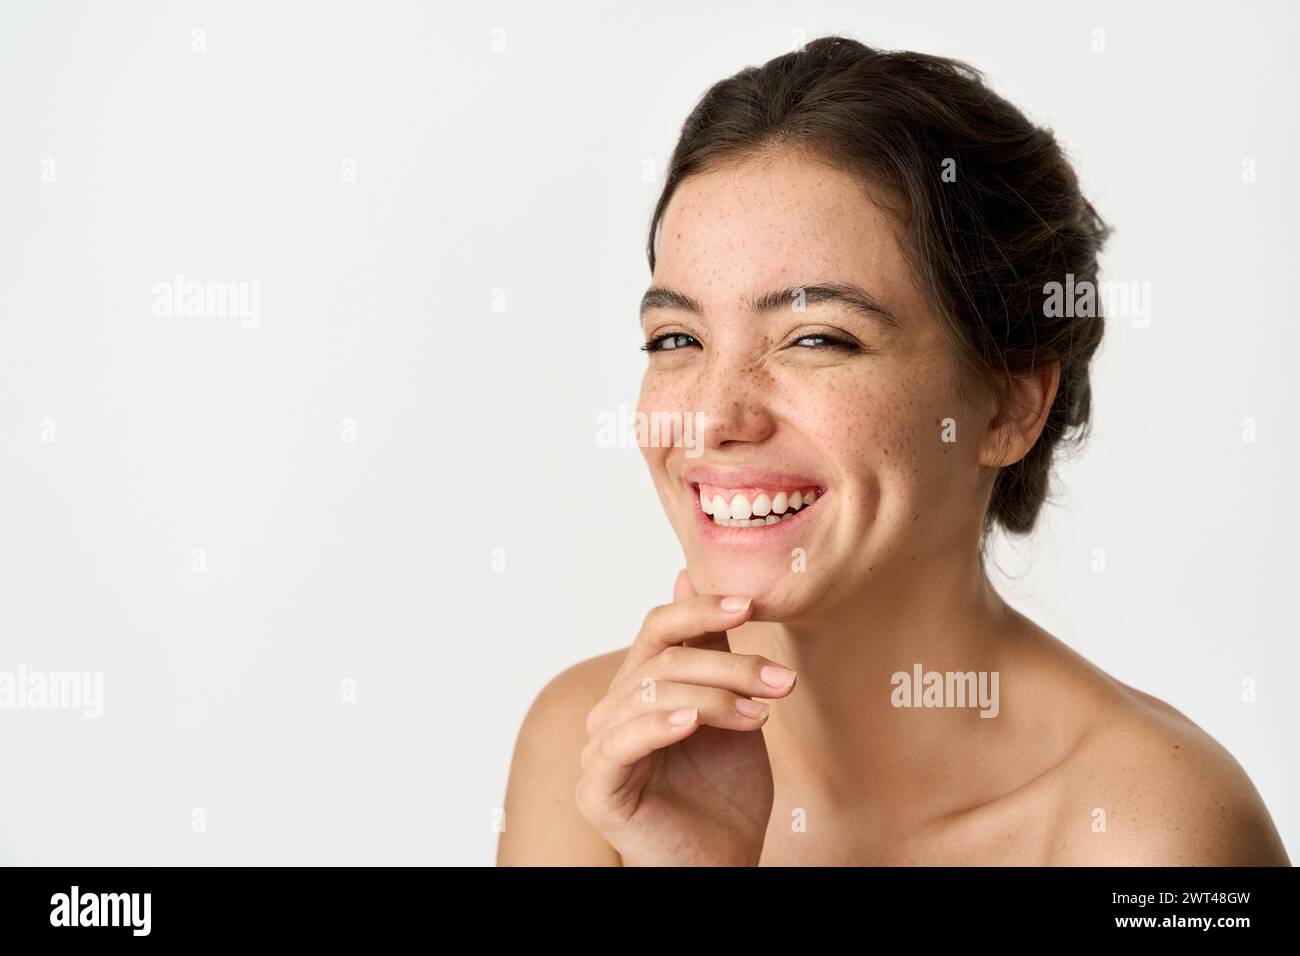 Happy Latin young woman with freckles on face isolated on white. Portrait. Stock Photo